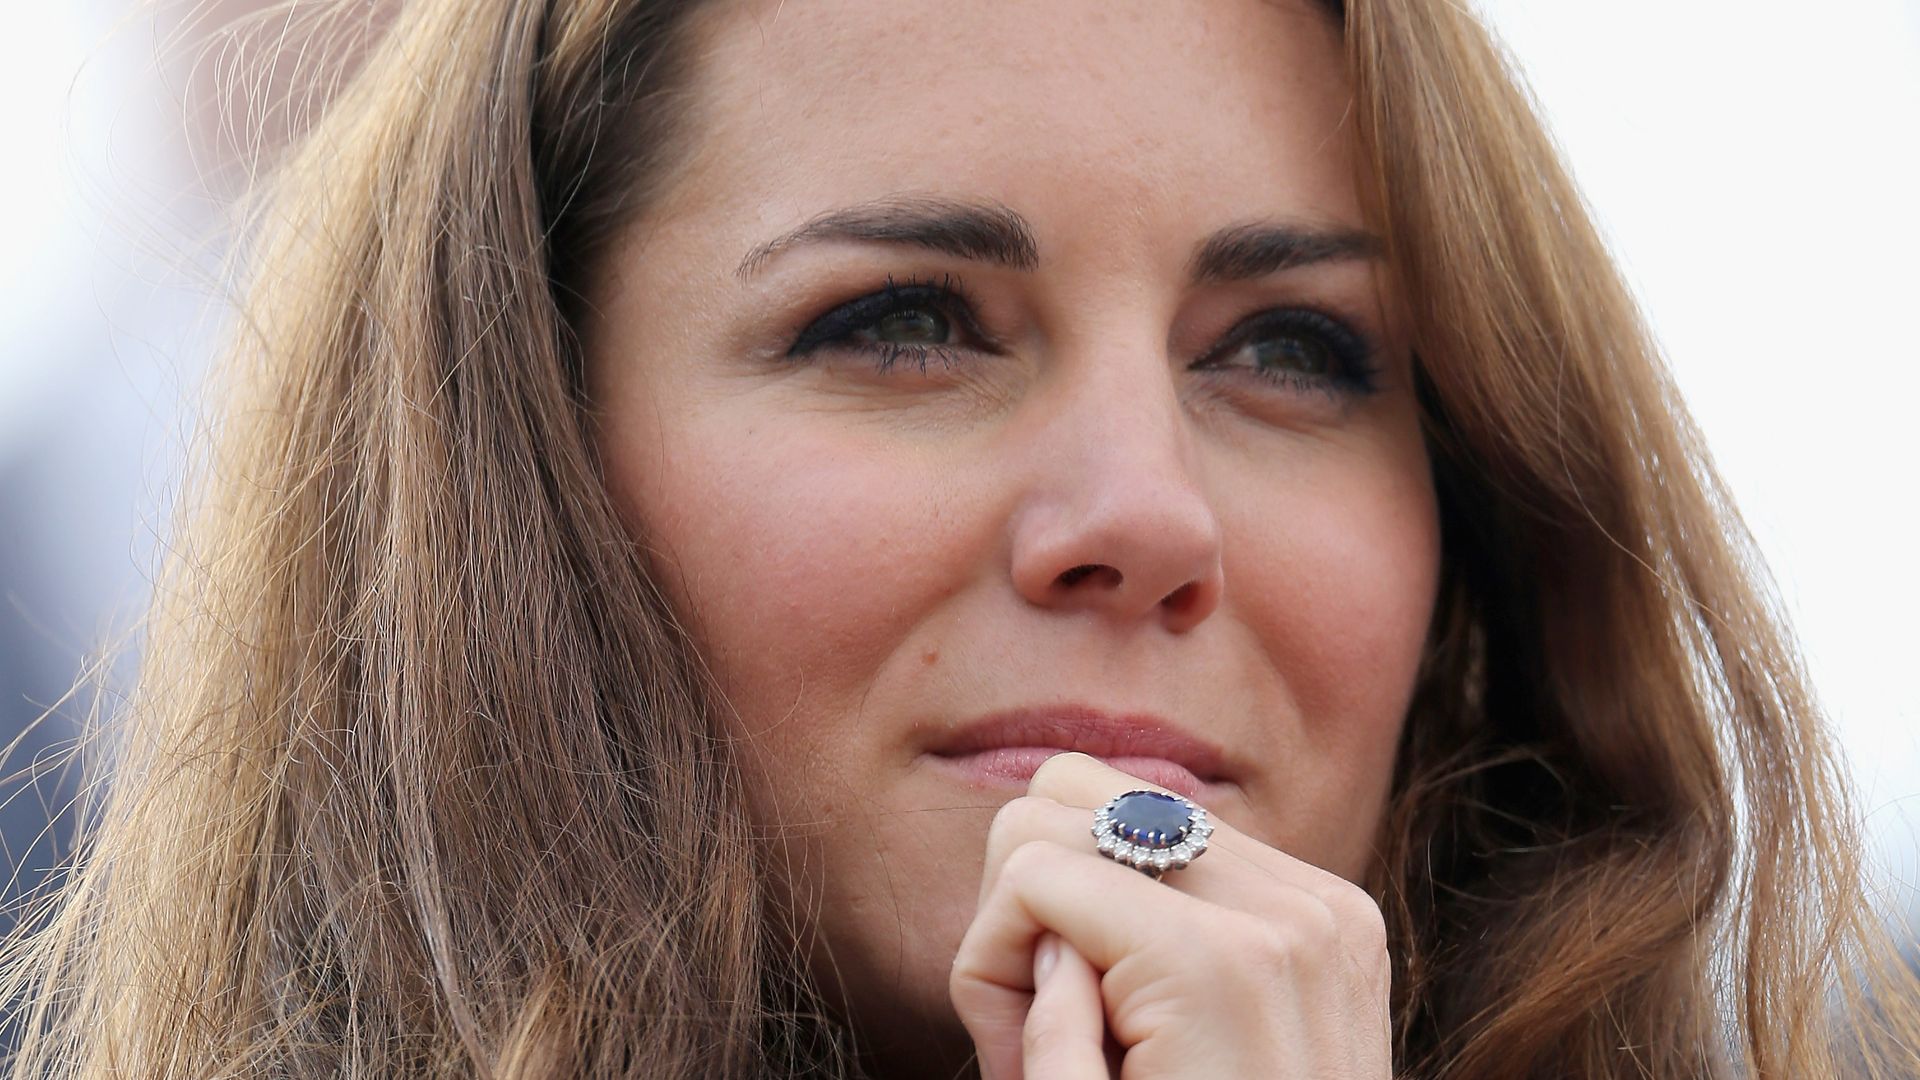 Prince William proposed to Kate back in 2010 and gifted her Princess Diana's sapphire engagement ring